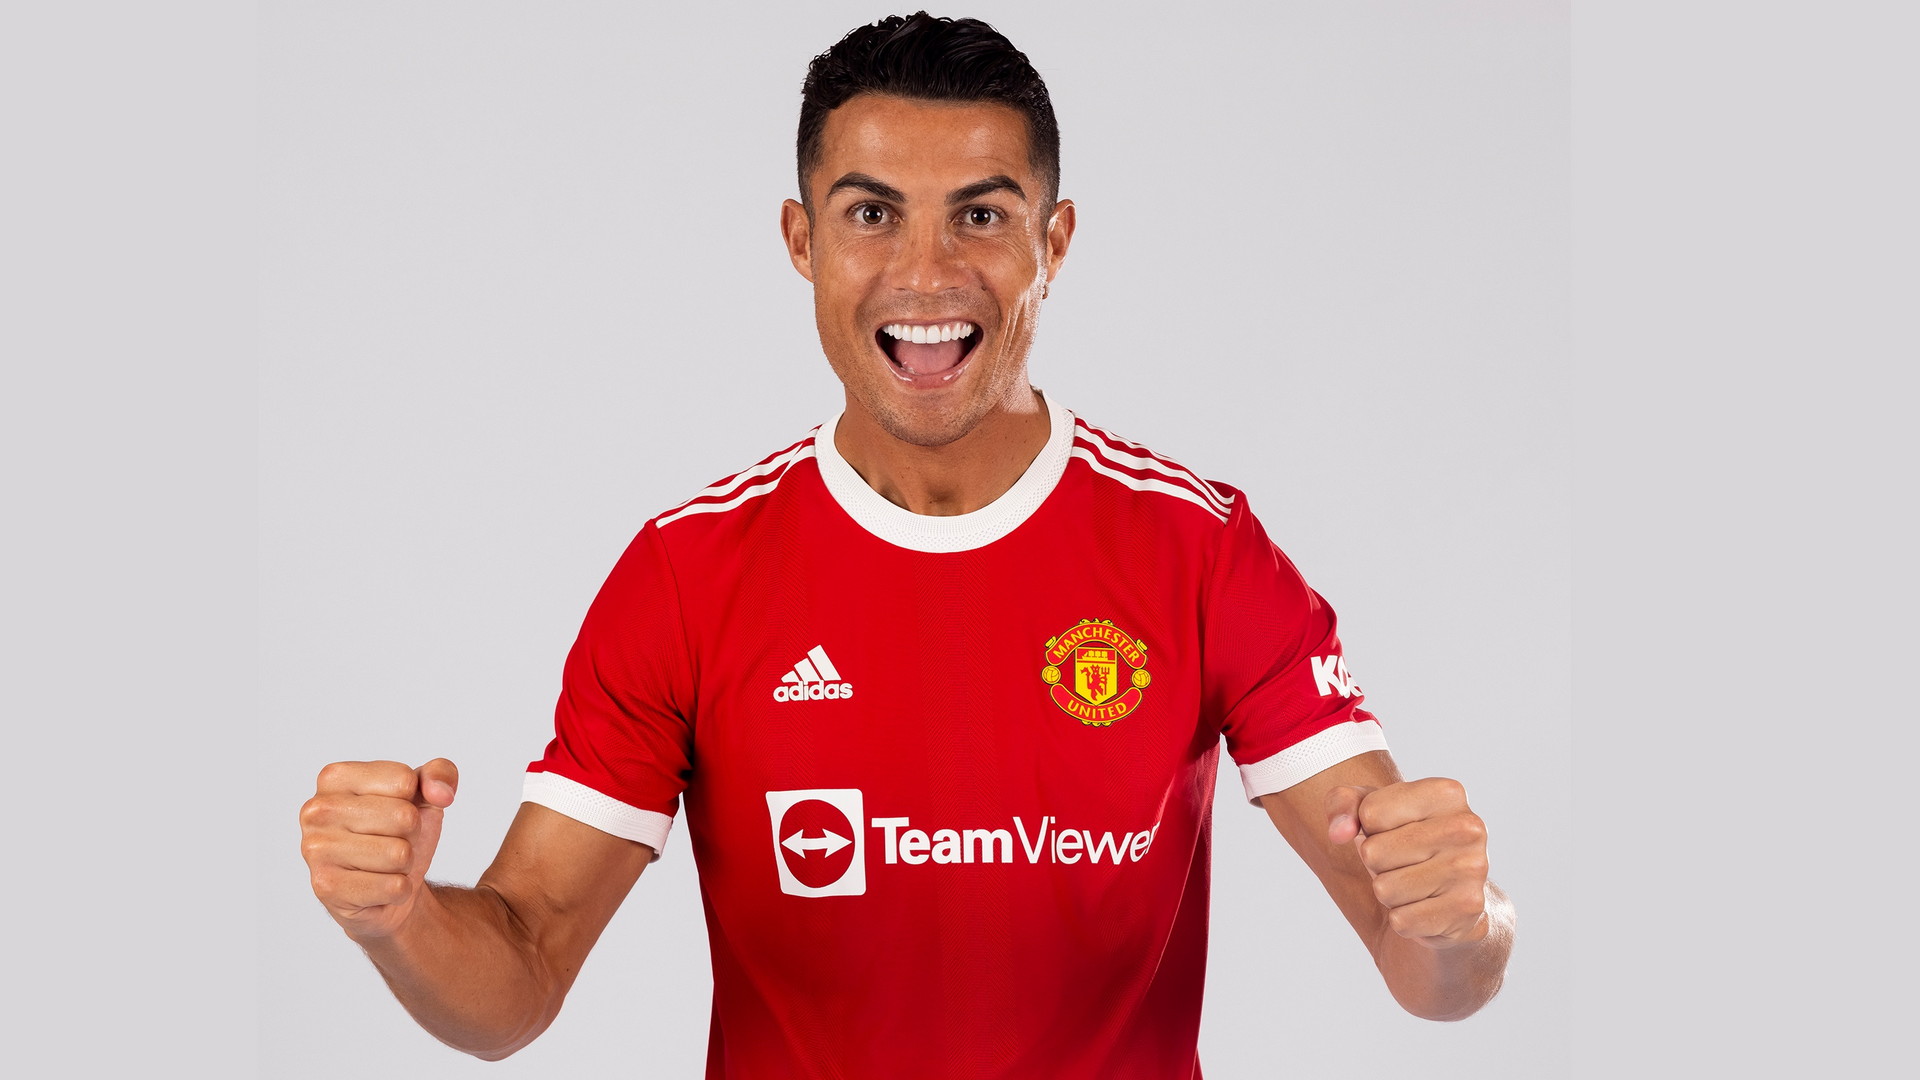 Wallpapers HD Cristiano Ronaldo Manchester United With high-resolution 1920X1080 pixel. You can use this wallpaper for your Desktop Computers, Mac Screensavers, Windows Backgrounds, iPhone Wallpapers, Tablet or Android Lock screen and another Mobile device